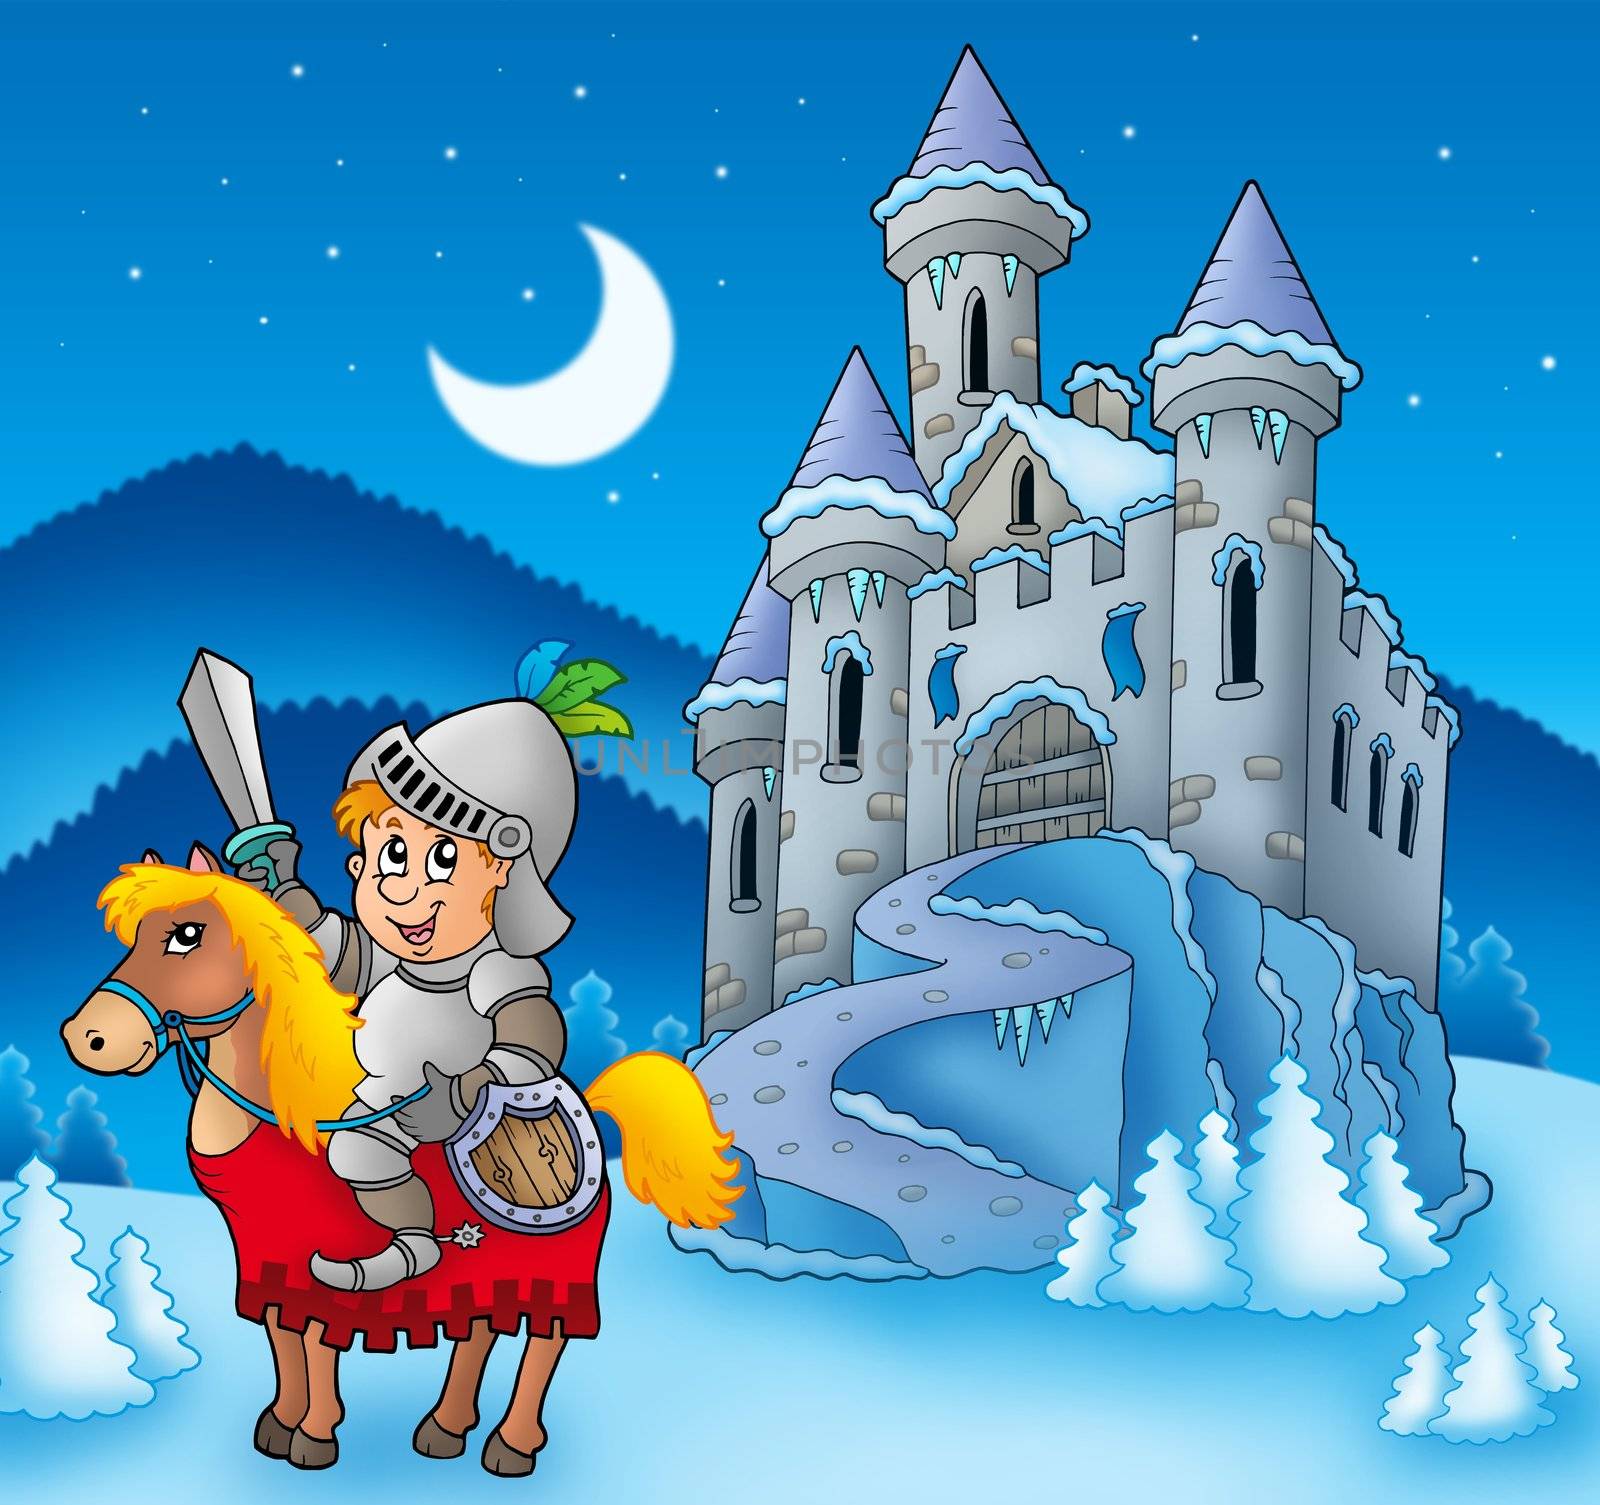 Knight on horse with winter castle - color illustration.